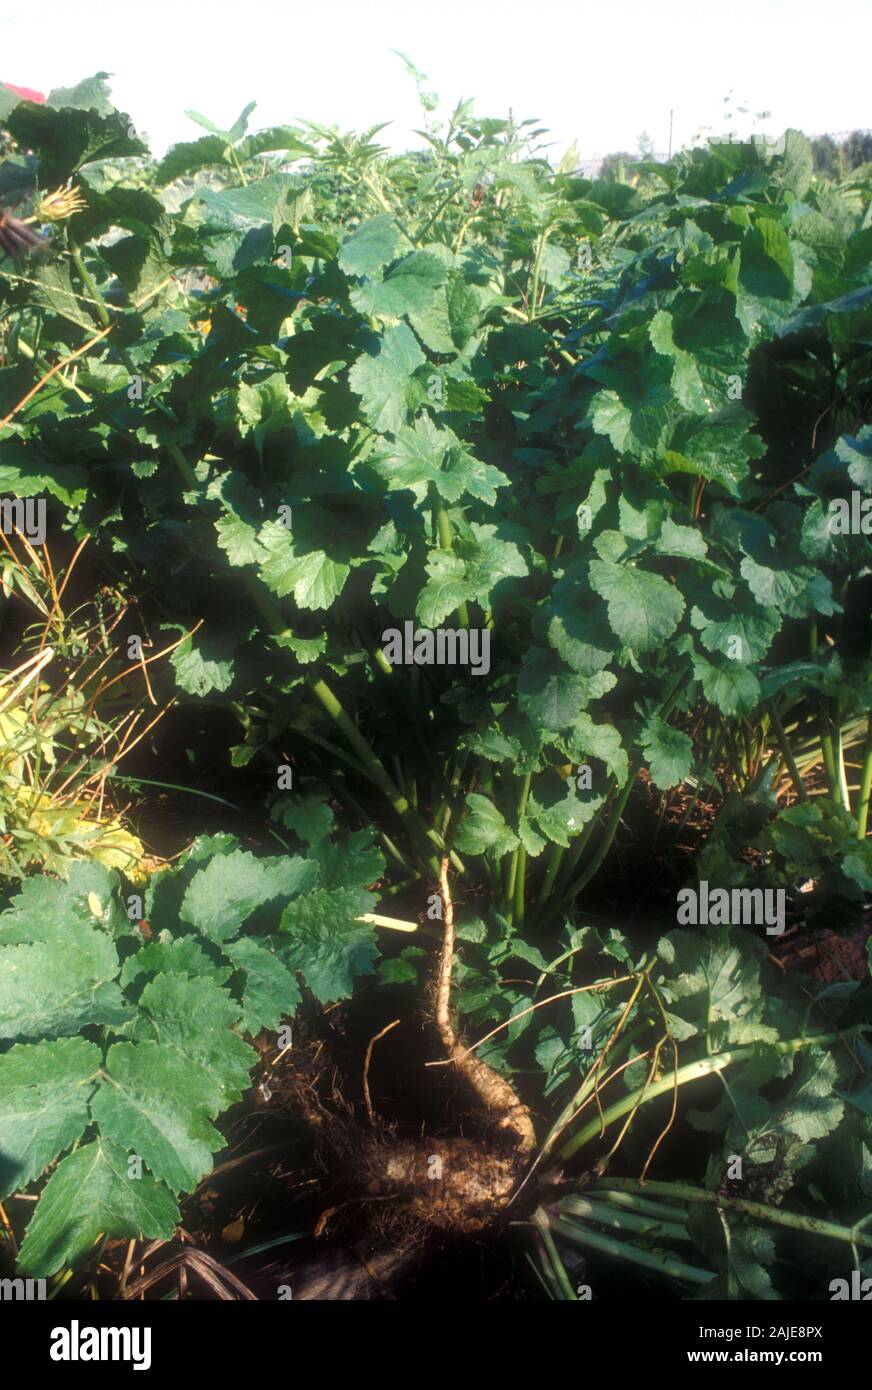 PARSNIPS GROWING (PASTINACA SATIVA) IN A MARKET GARDEN  ON THE OUTSKIRTS OF SYDNEY, NSW, AUSTRALIA. Stock Photo